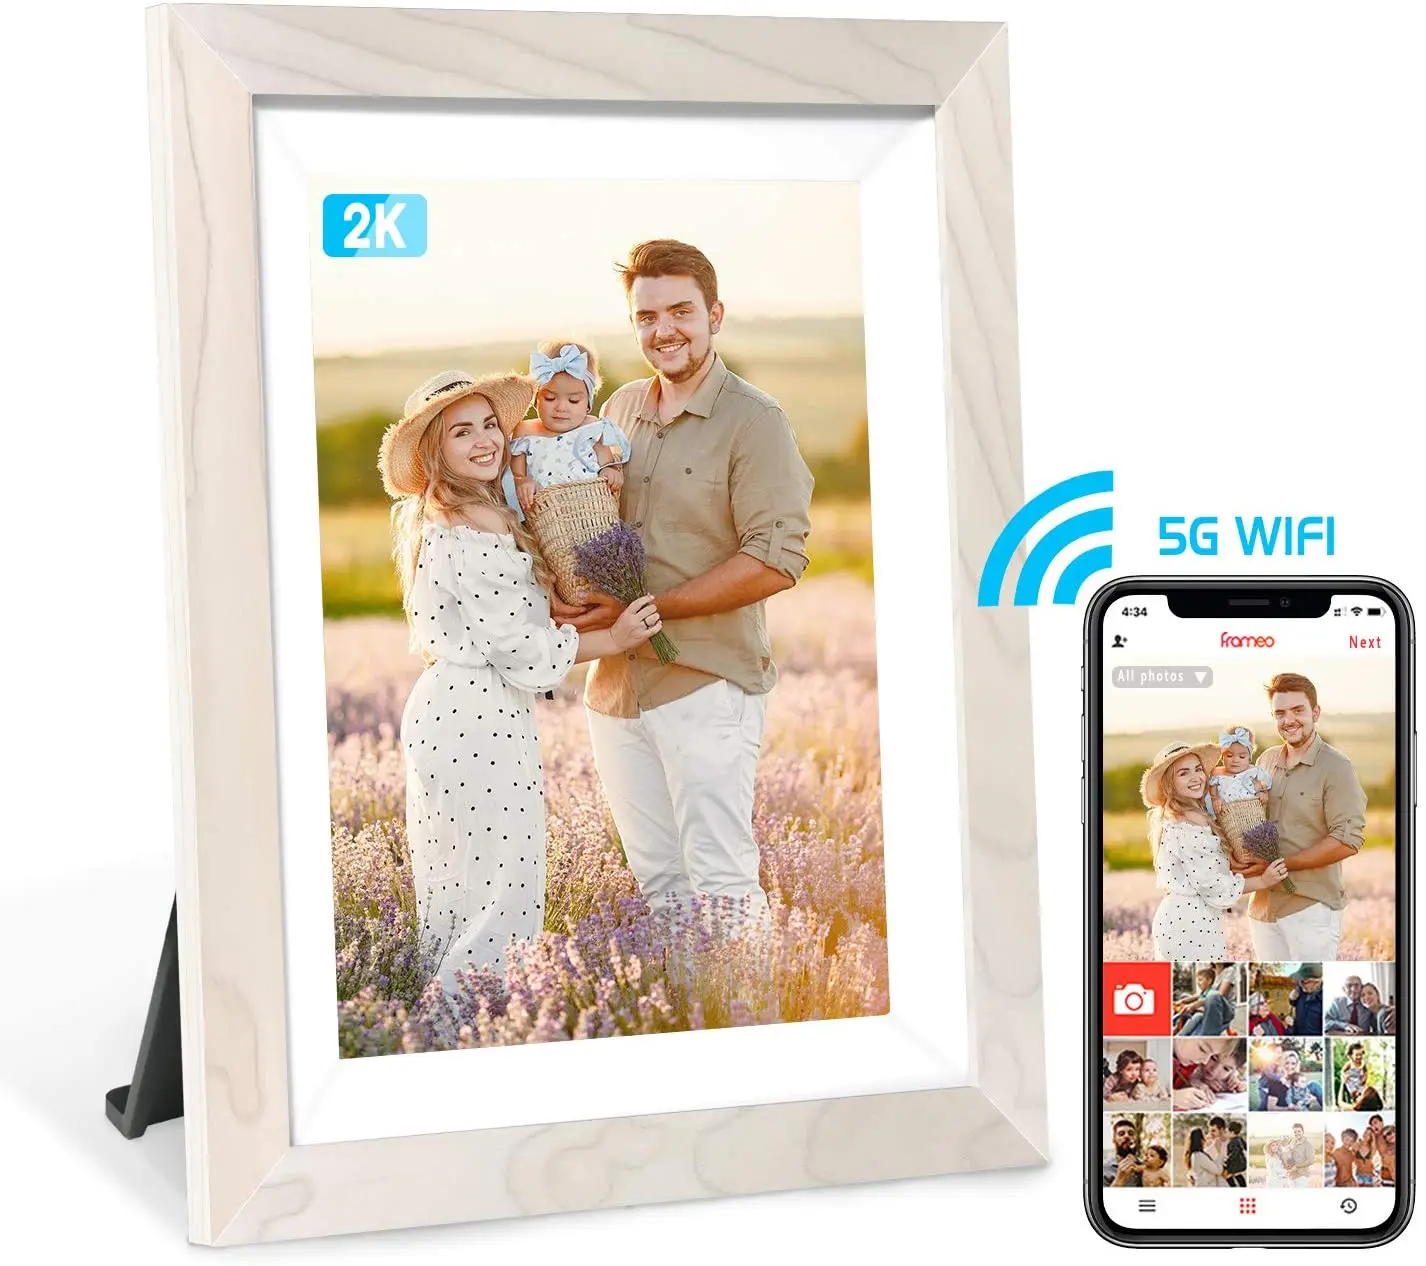 

Share Photos via Frameo/Email/Cloud/USB /TF Card 9.7" IPS 2K TOUCH SCREEN HDMI Auto-Rotate Wifi Digital Photo picture Frames